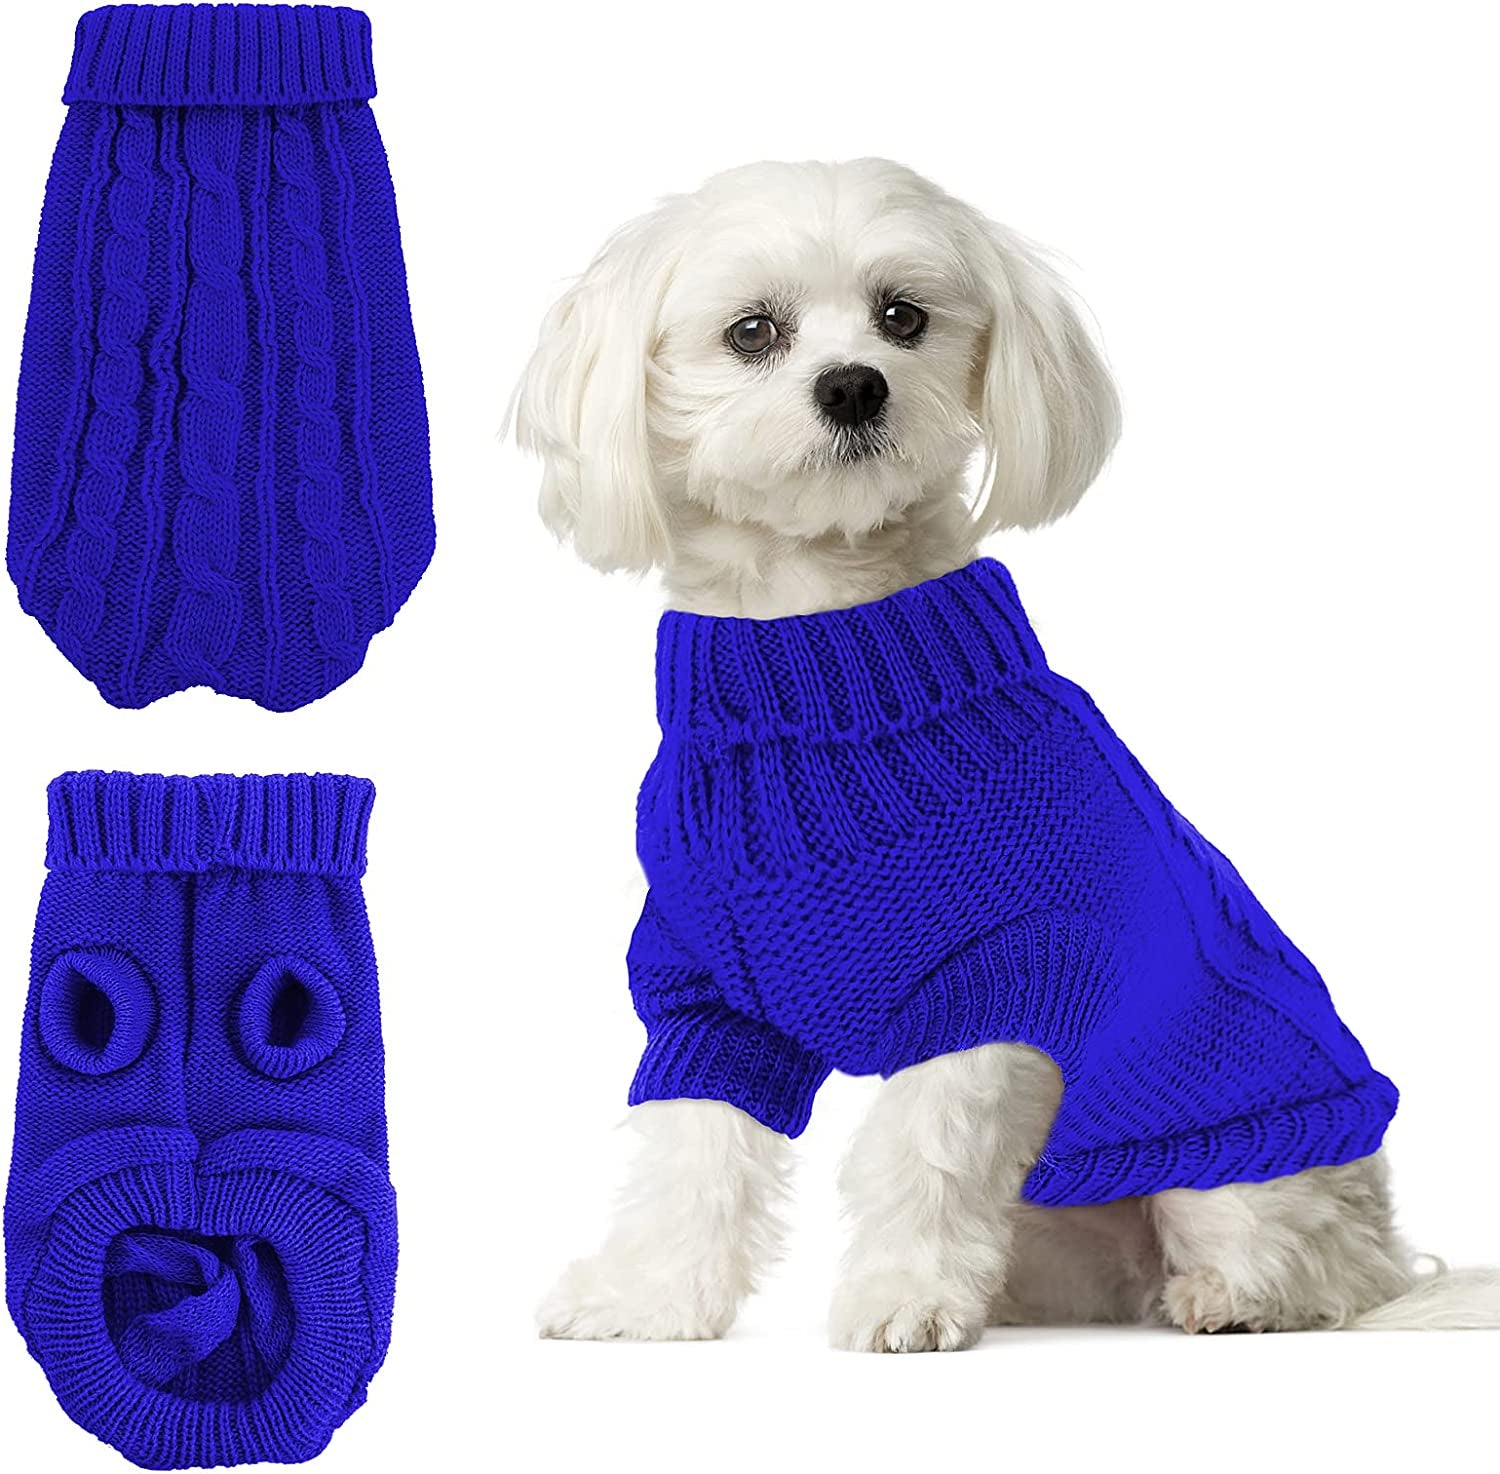 Small Dog Sweater Warm Pet Sweater Cute Knitted Classic Dog